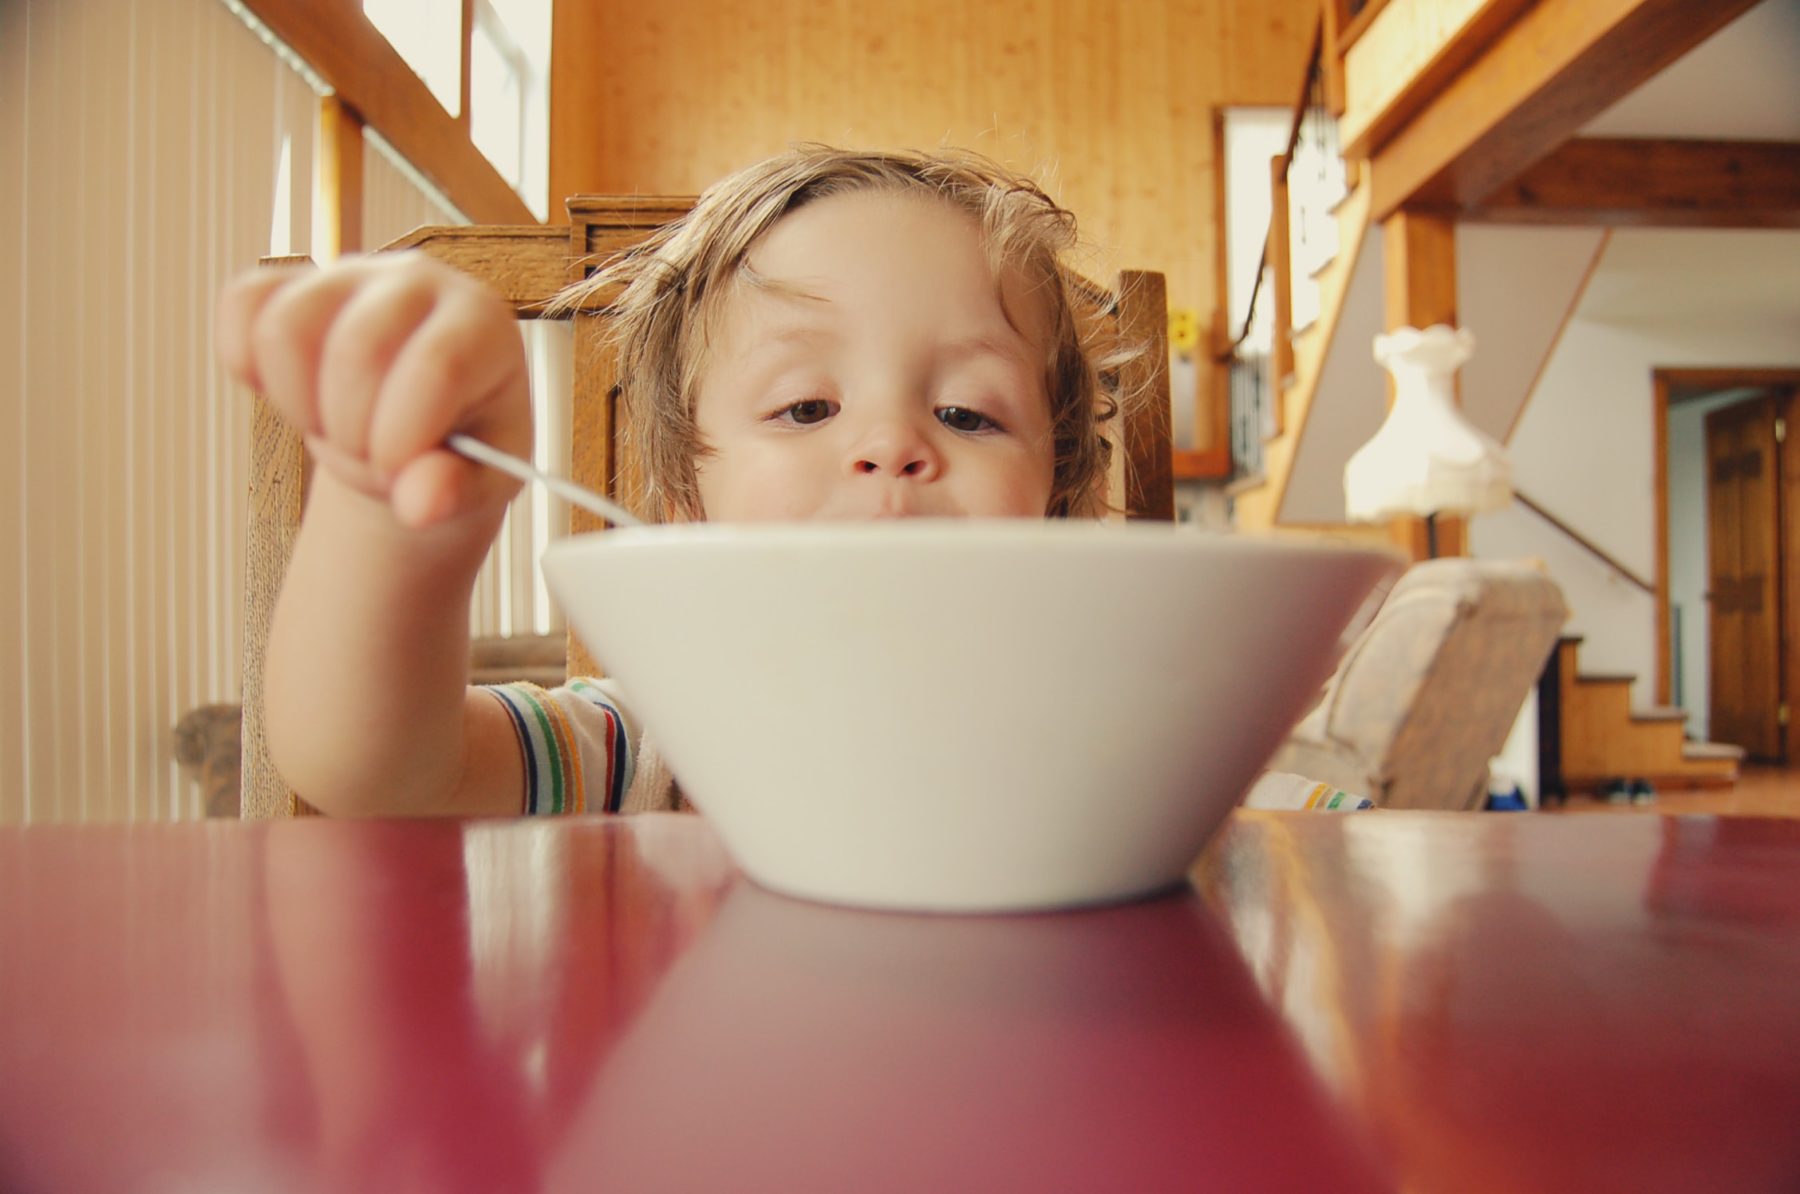 A young boy eating out of a bowl with a spoon at the dining table.